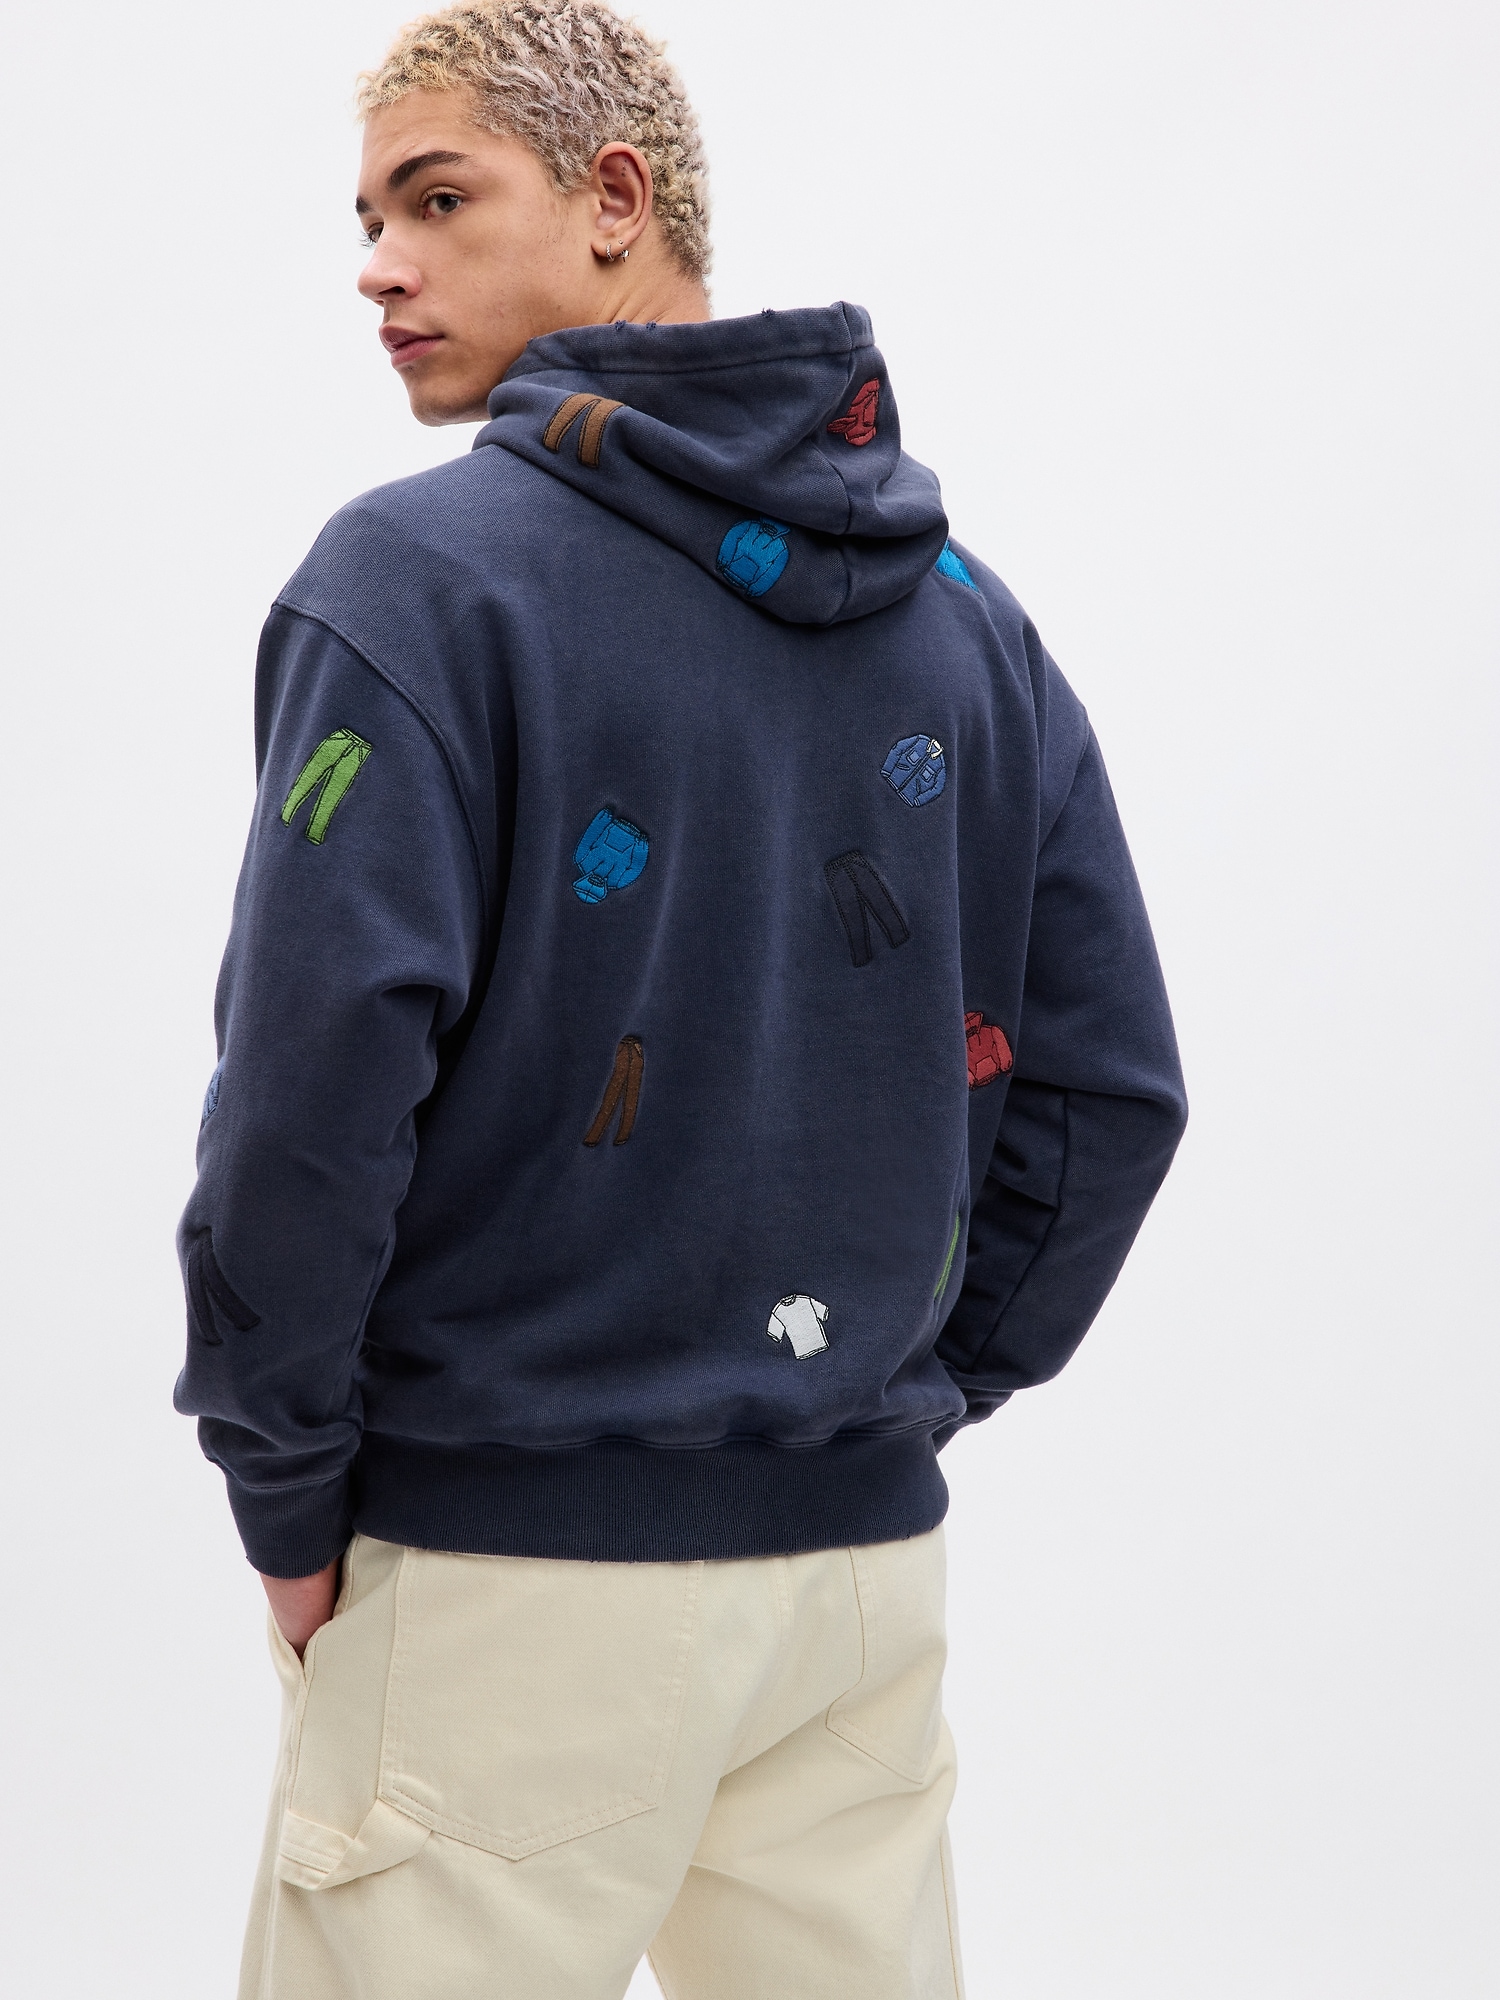 GAP Re-Issue by Sean Wotherspoon jacketco - Gジャン/デニムジャケット